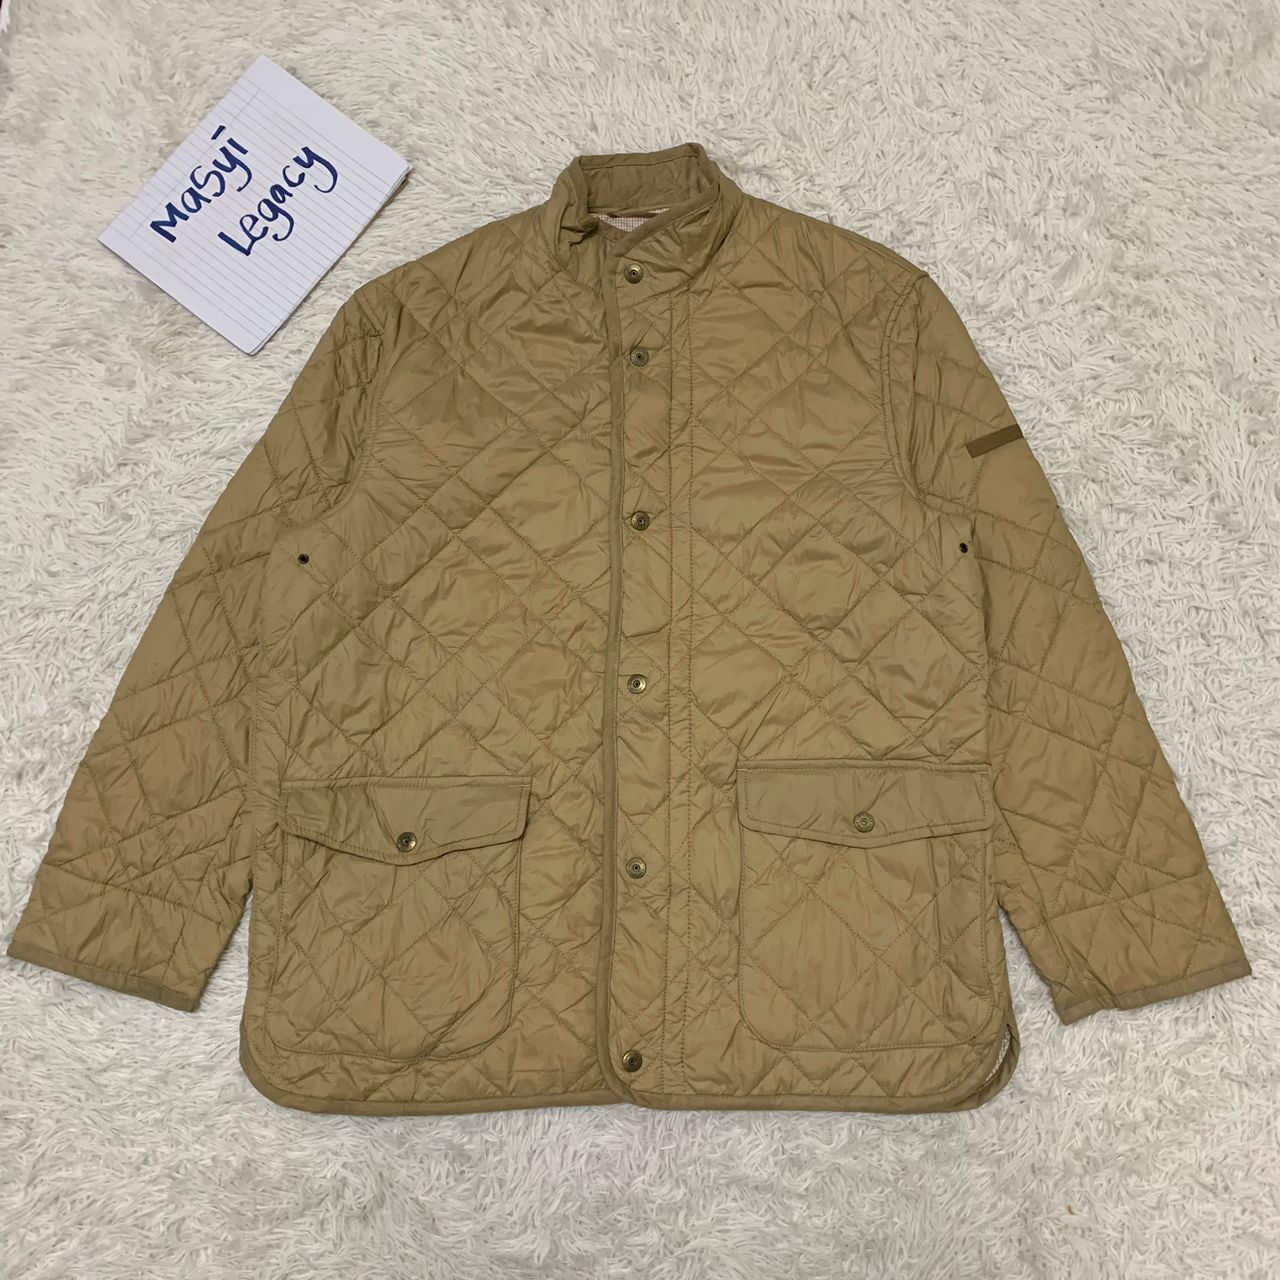 Vintage Thinsulate Ex-soft insulation Crocodile quilted jacket | Grailed